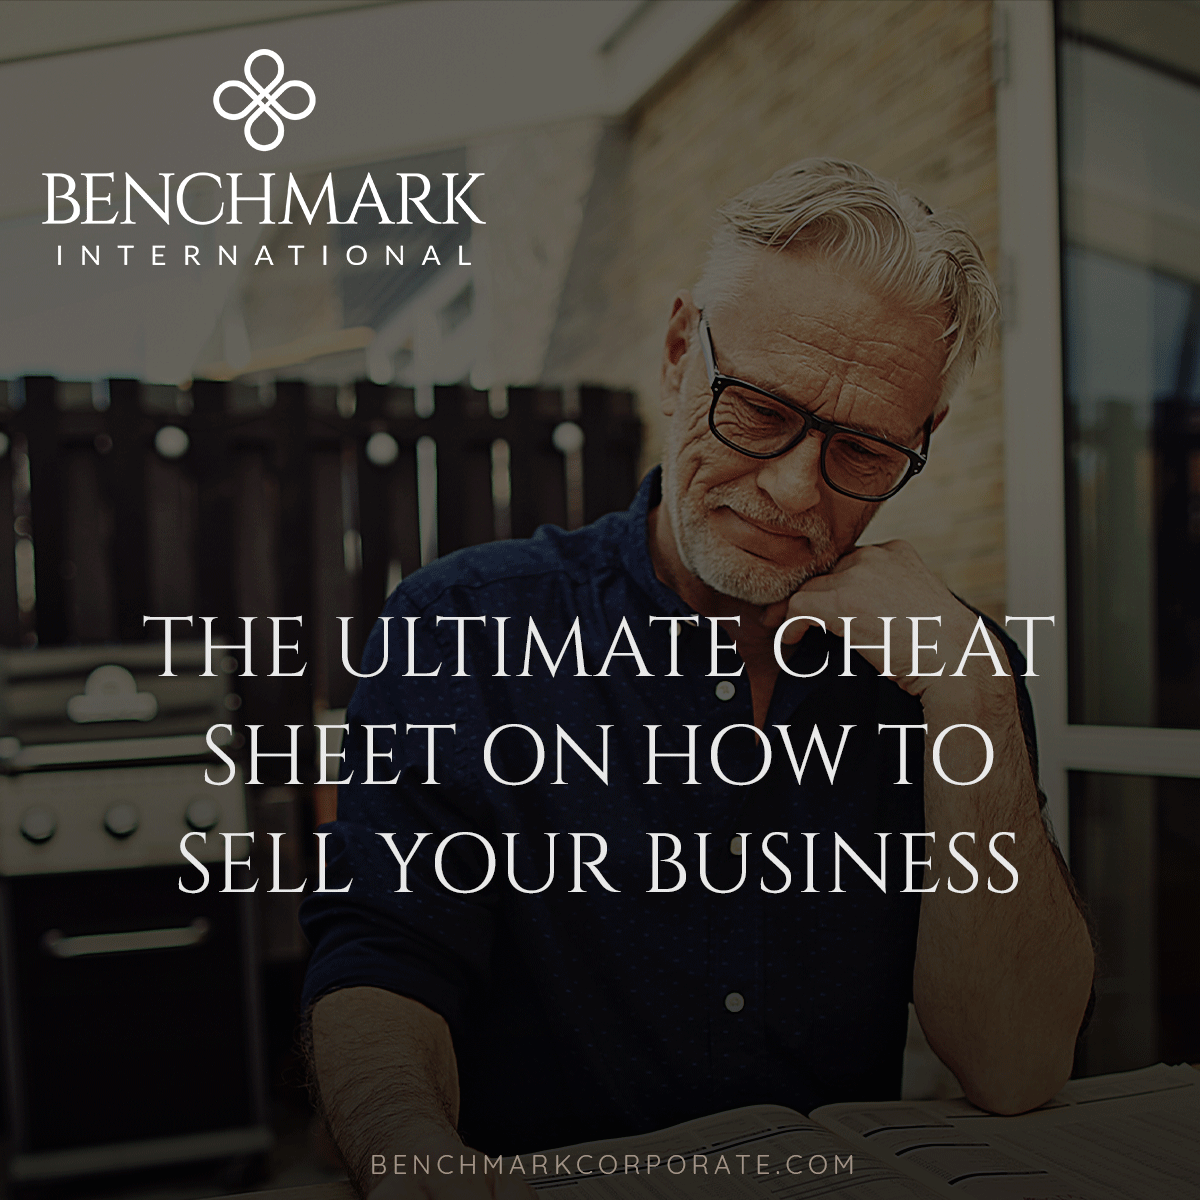 Cheat_Sheet_to_sell_Business_social